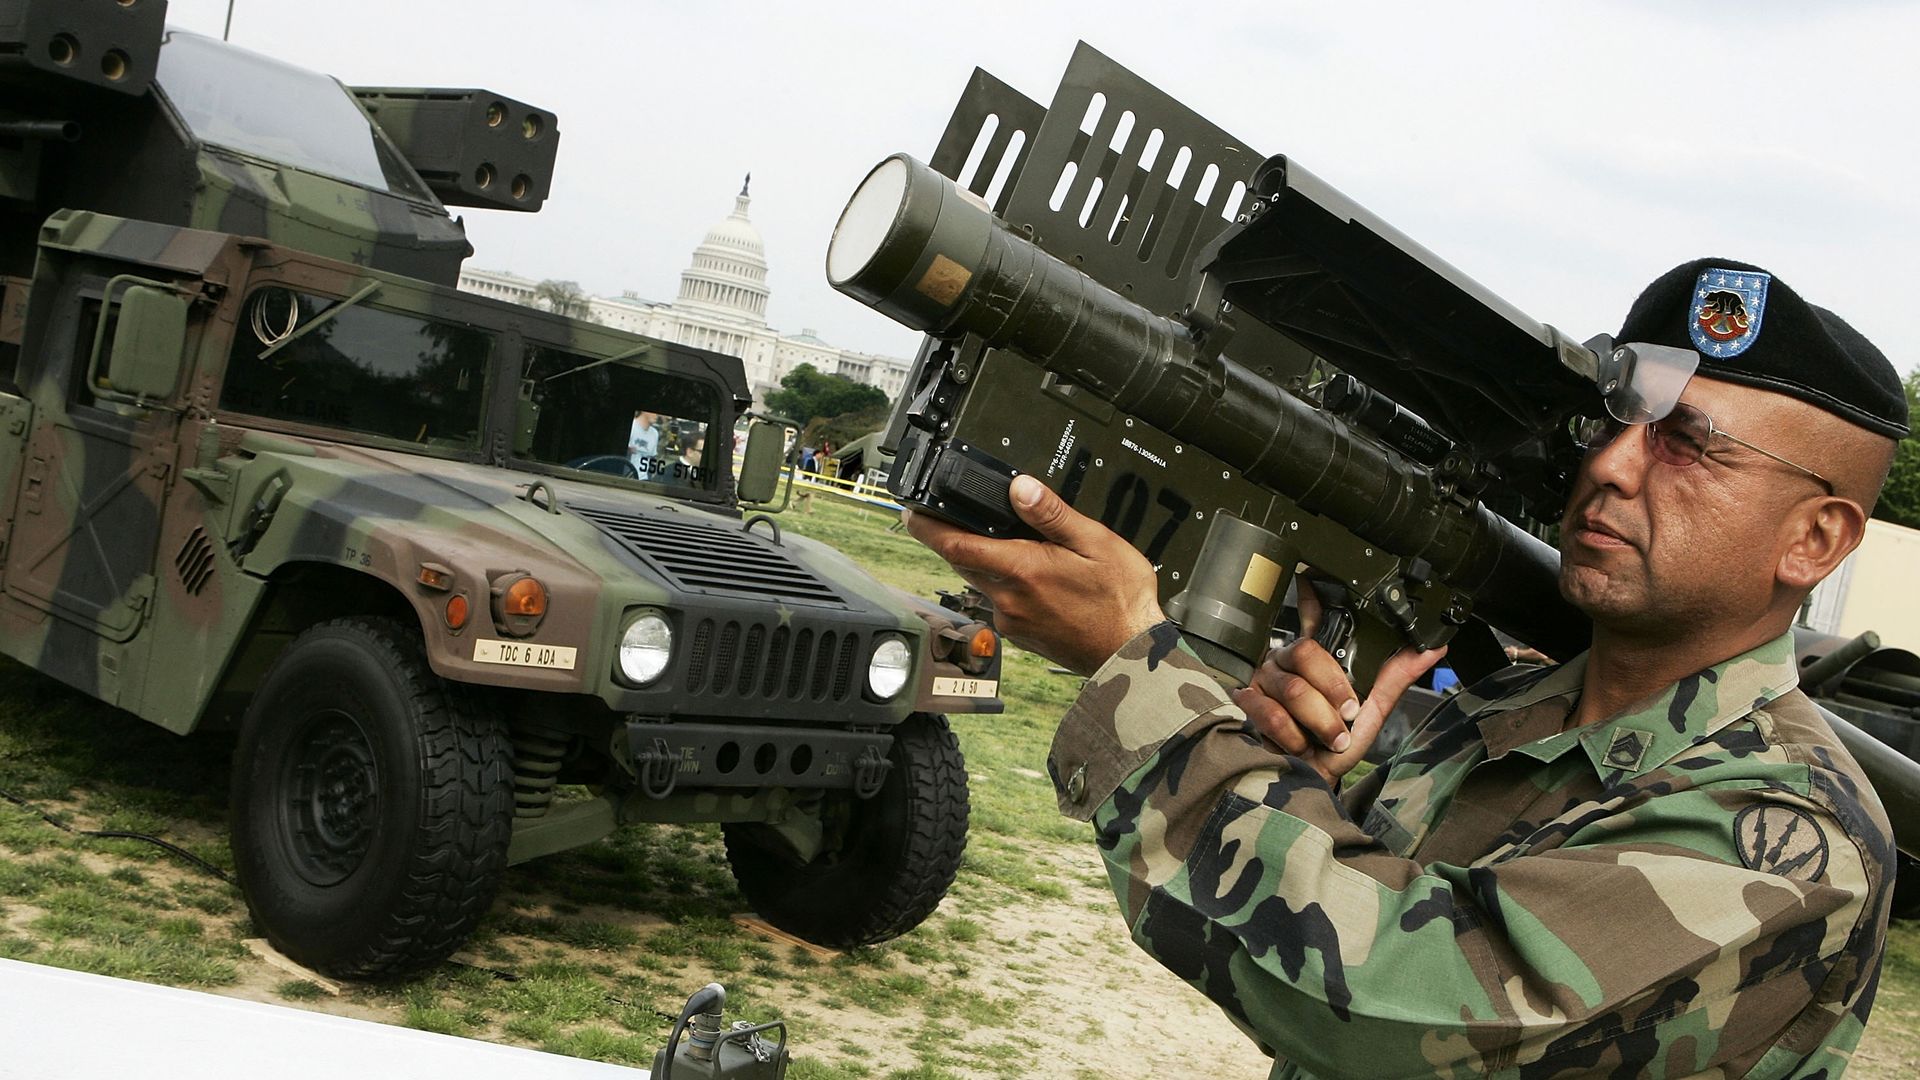 A U.S. Army staff sergeant handling a Stinger missile system in Washington, D.C., in 2005.